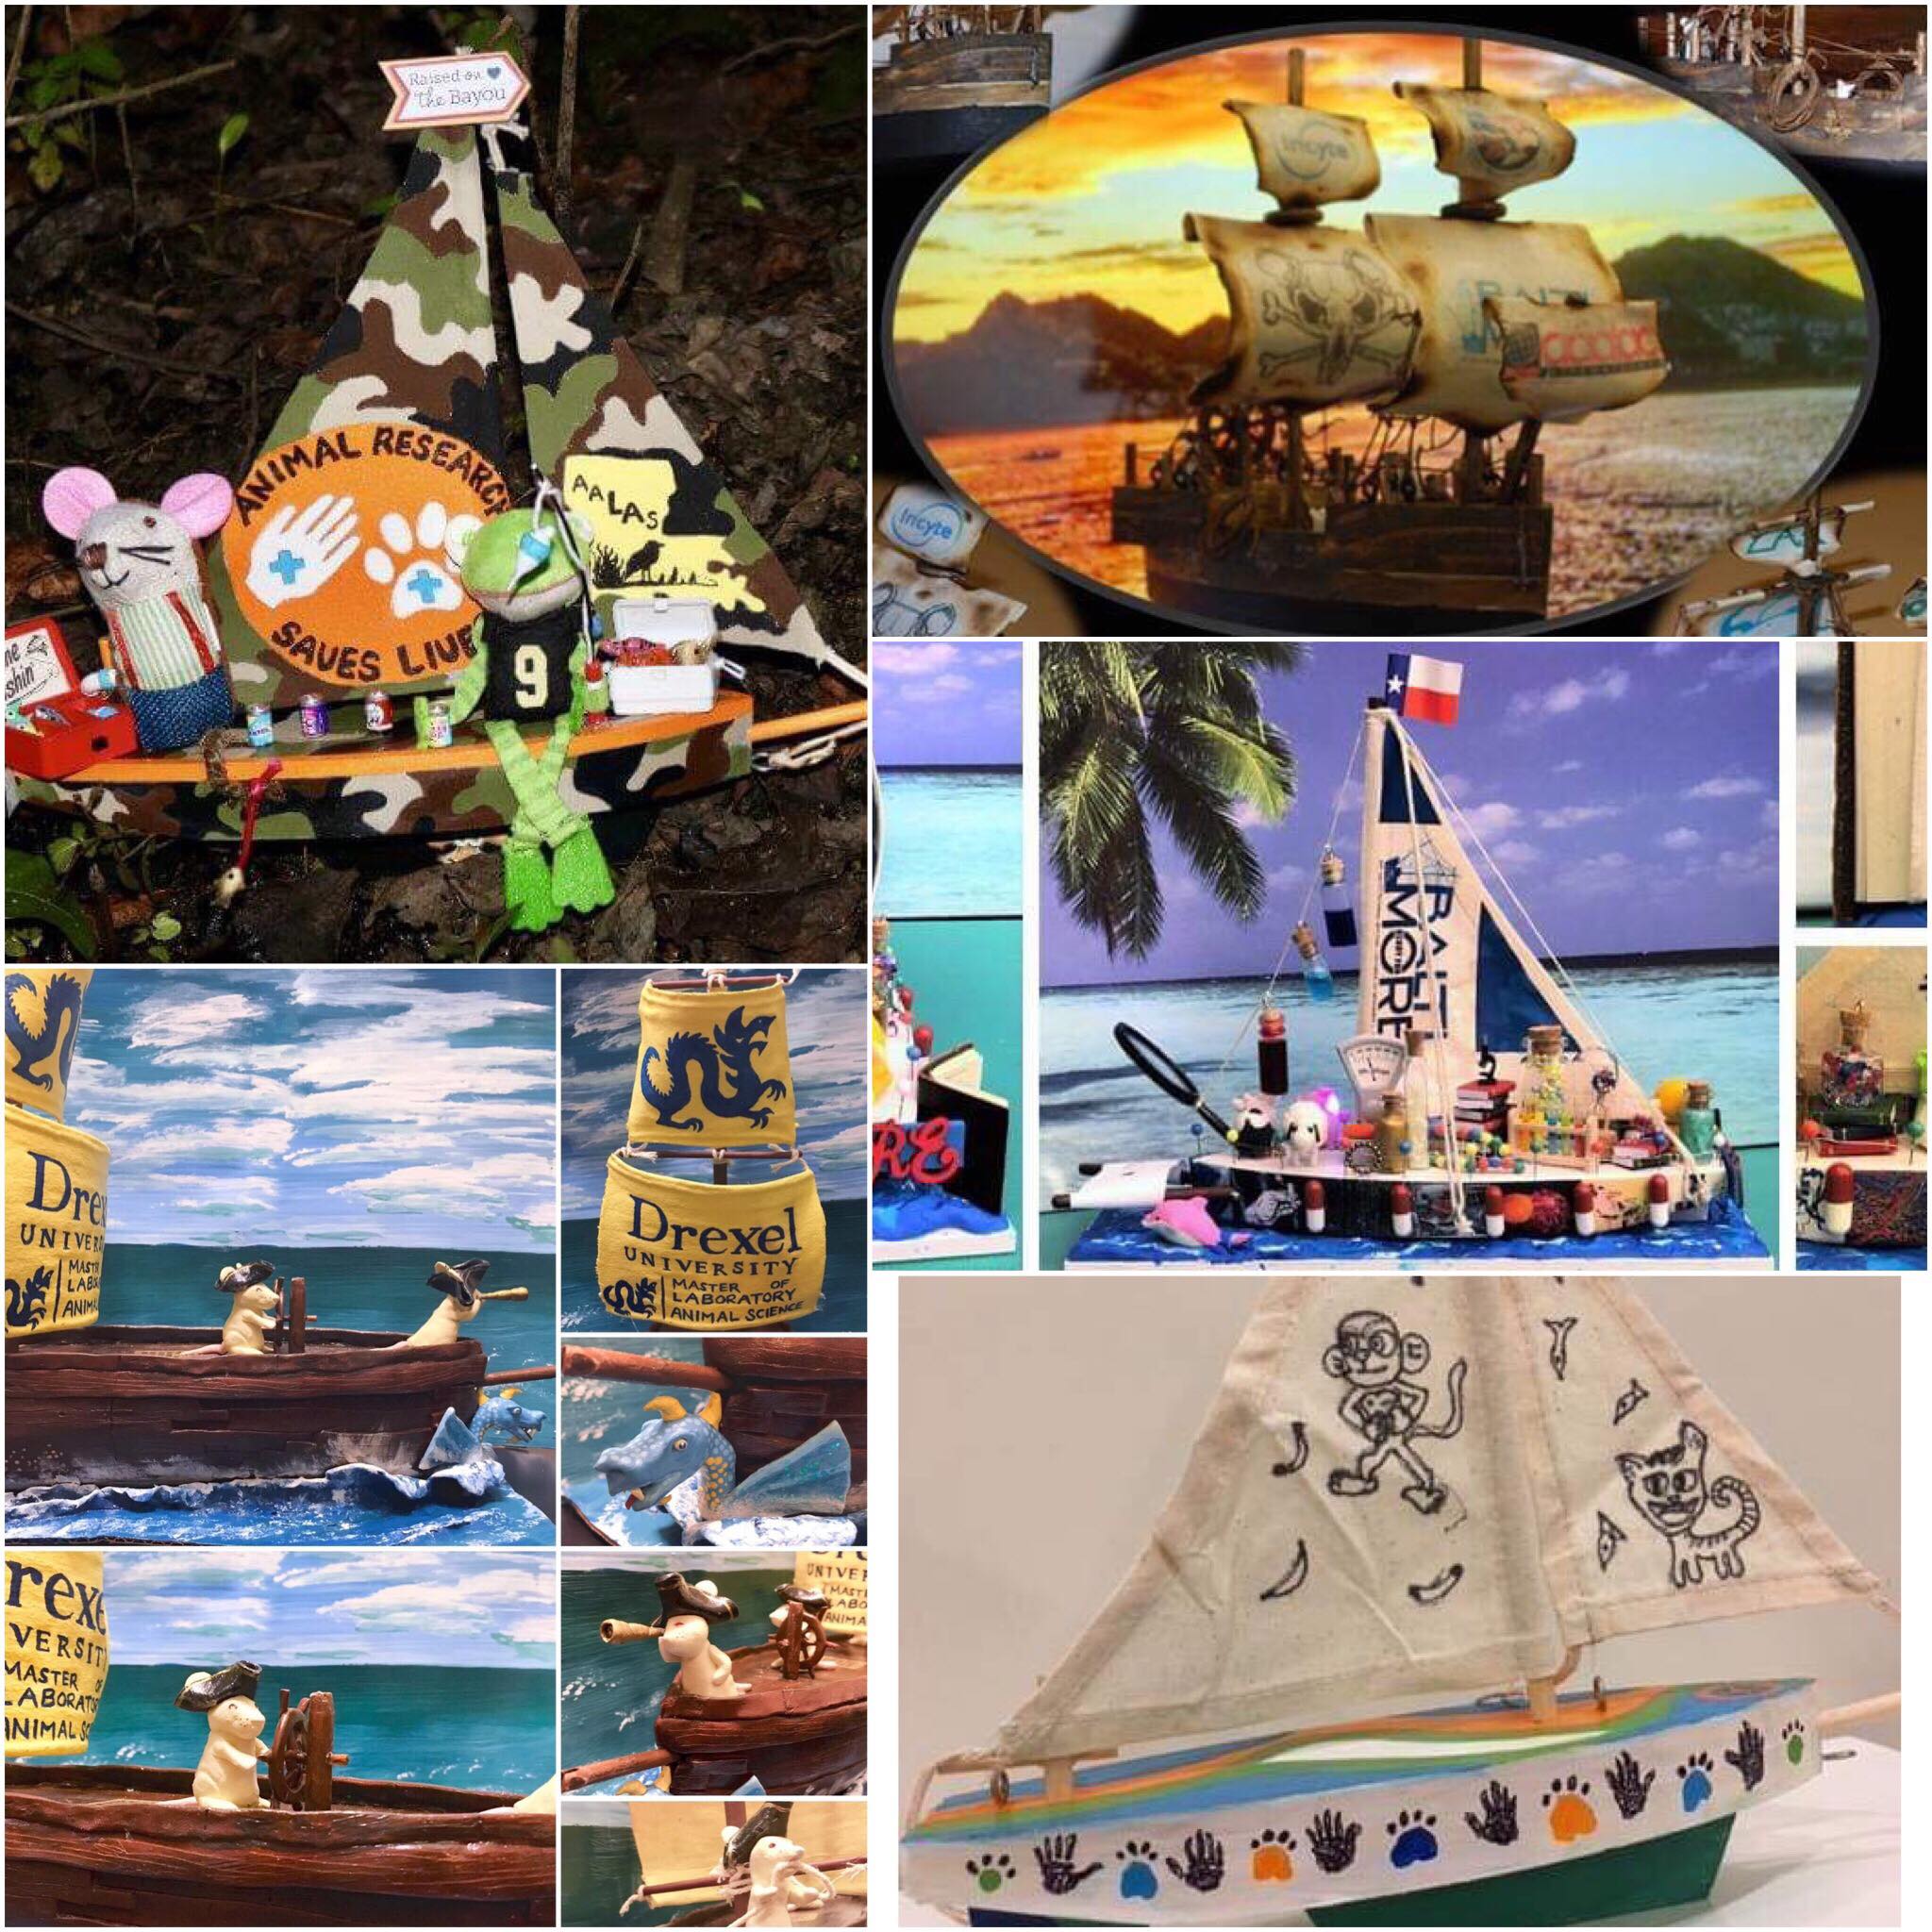 AALAS Foundation Announces Winners for the 2018 "Set Sail" Contest